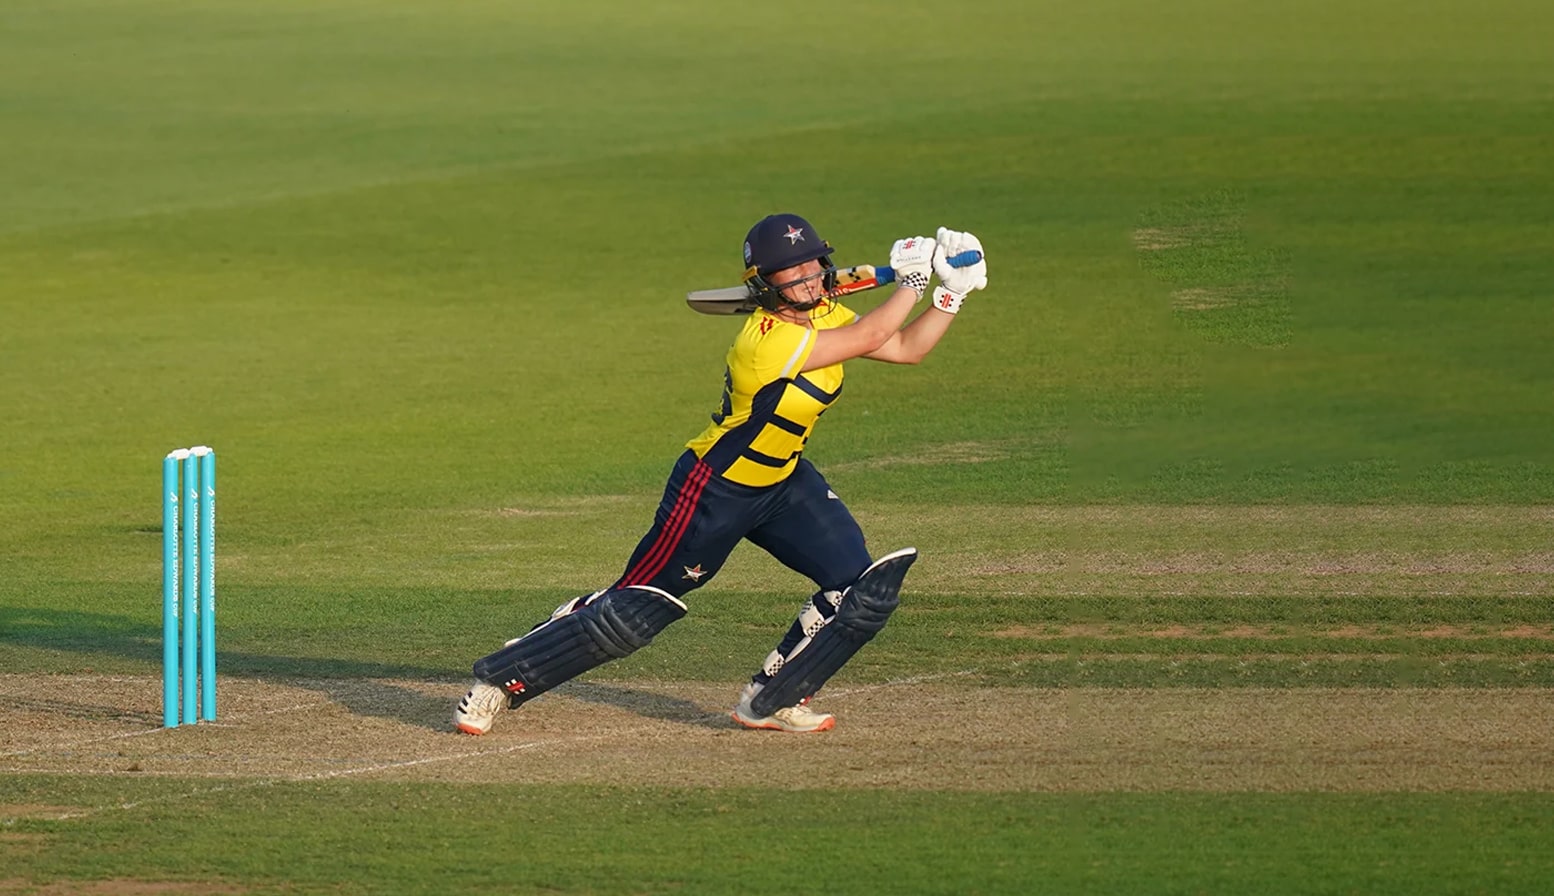 Capsey named PCA Women’s Young Player of the Year